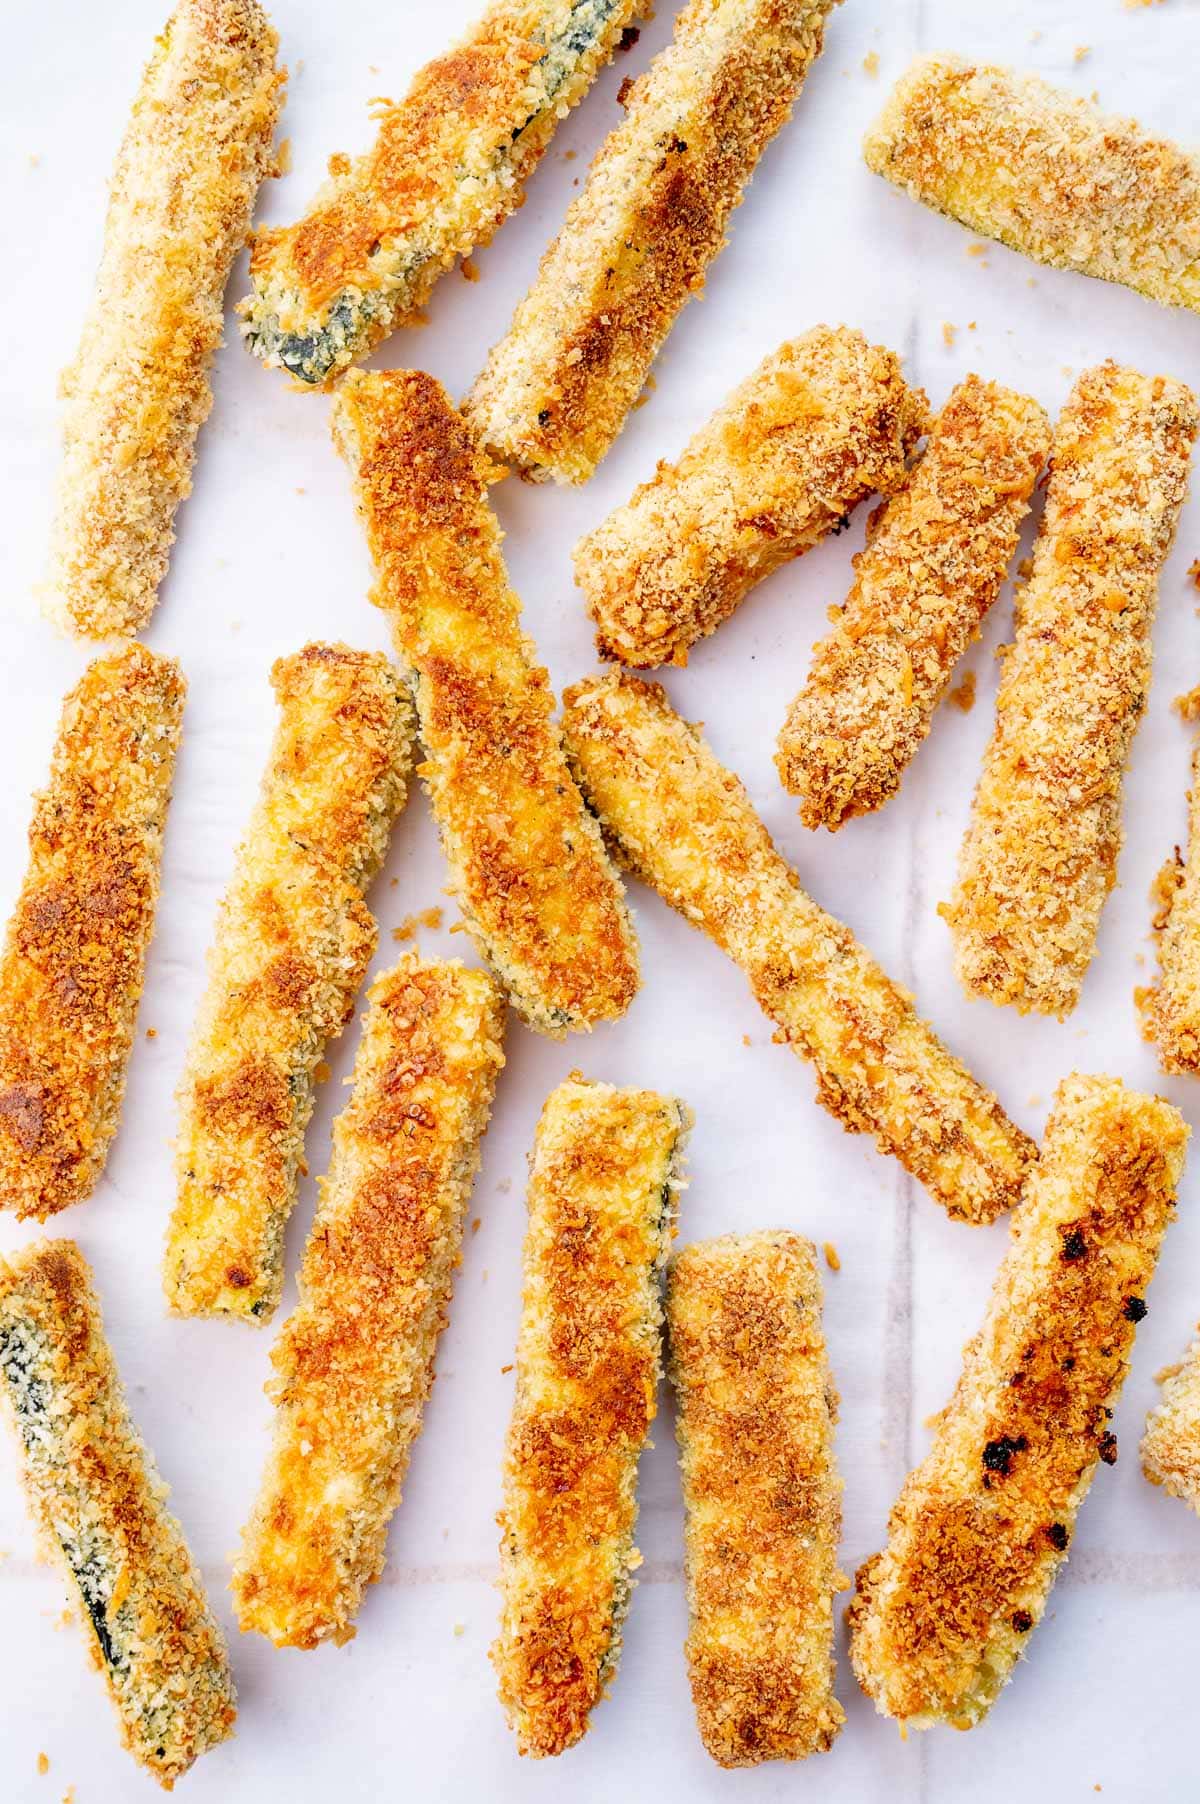 Zucchini fries on a piece of parchment paper.